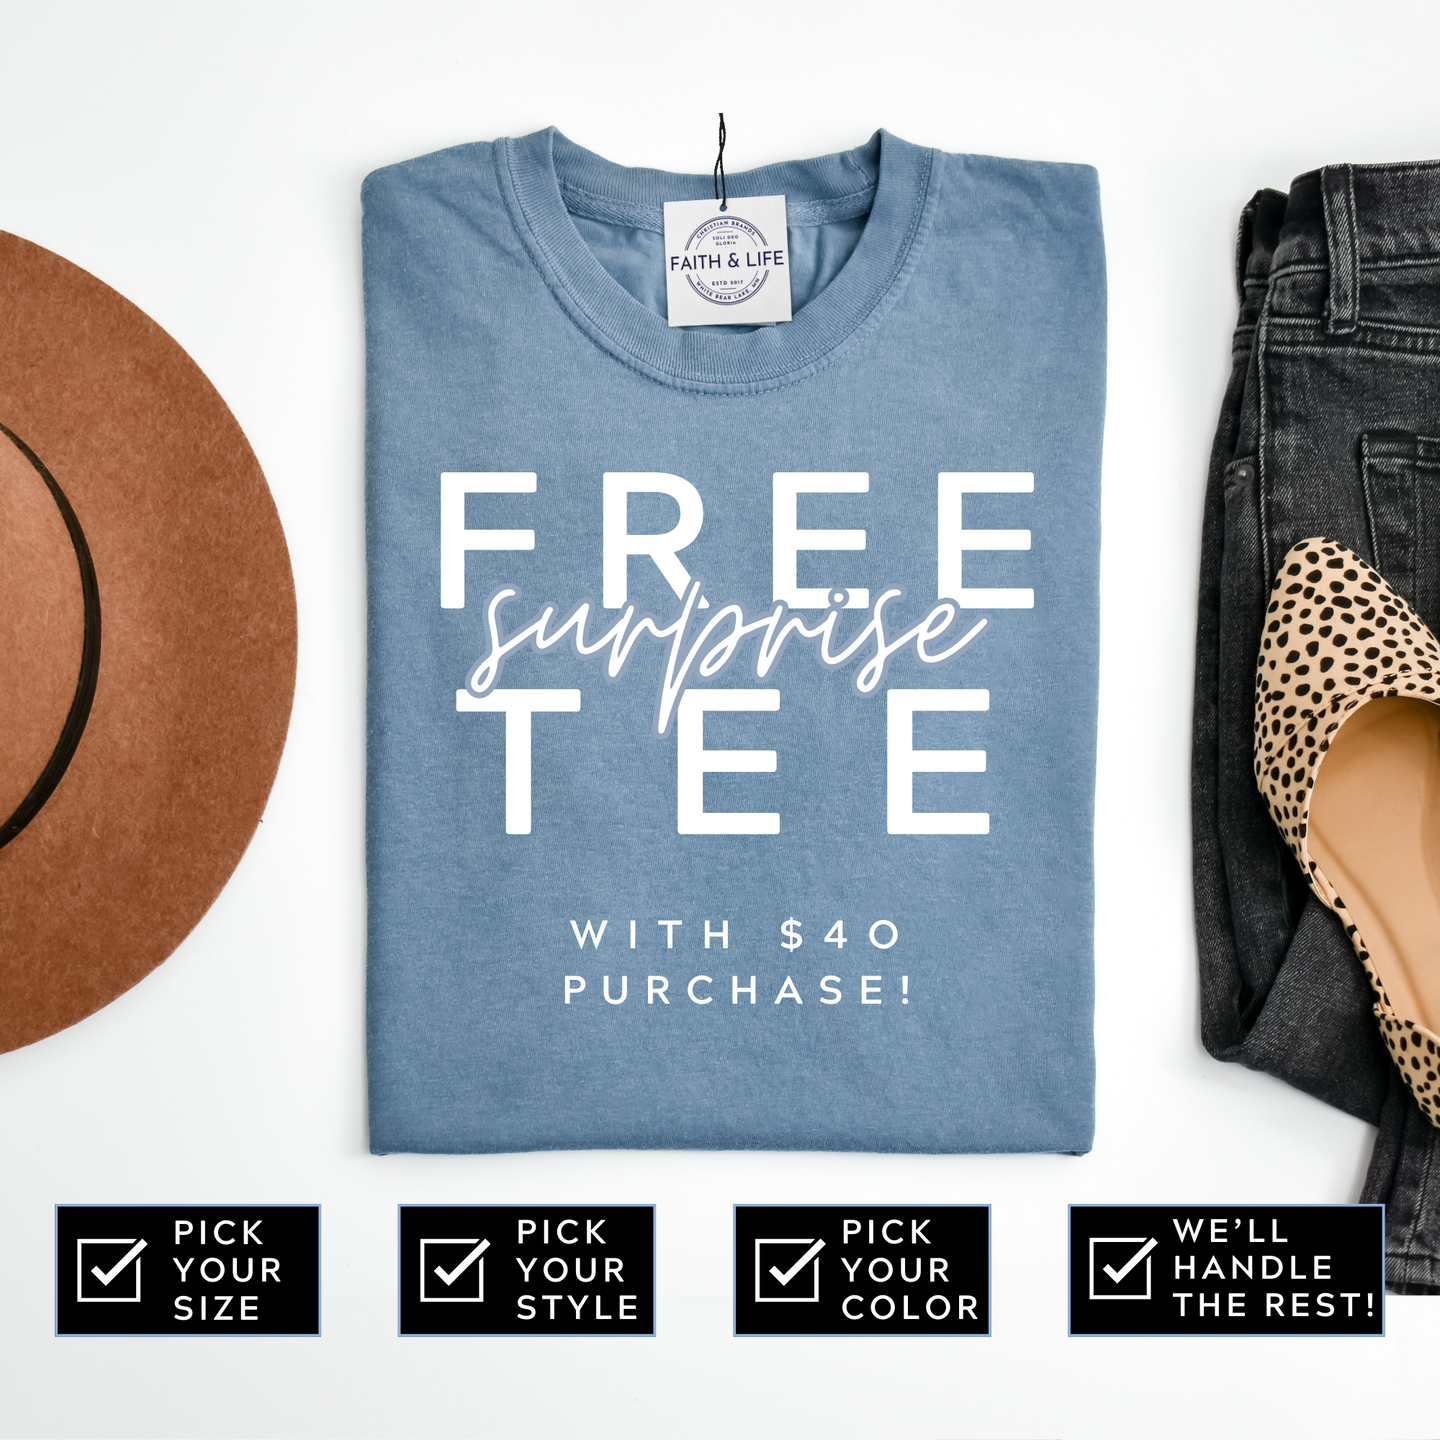 FREE Surprise Tee With Purchase Over $40! - Use Coupon Code: SURPRISEME